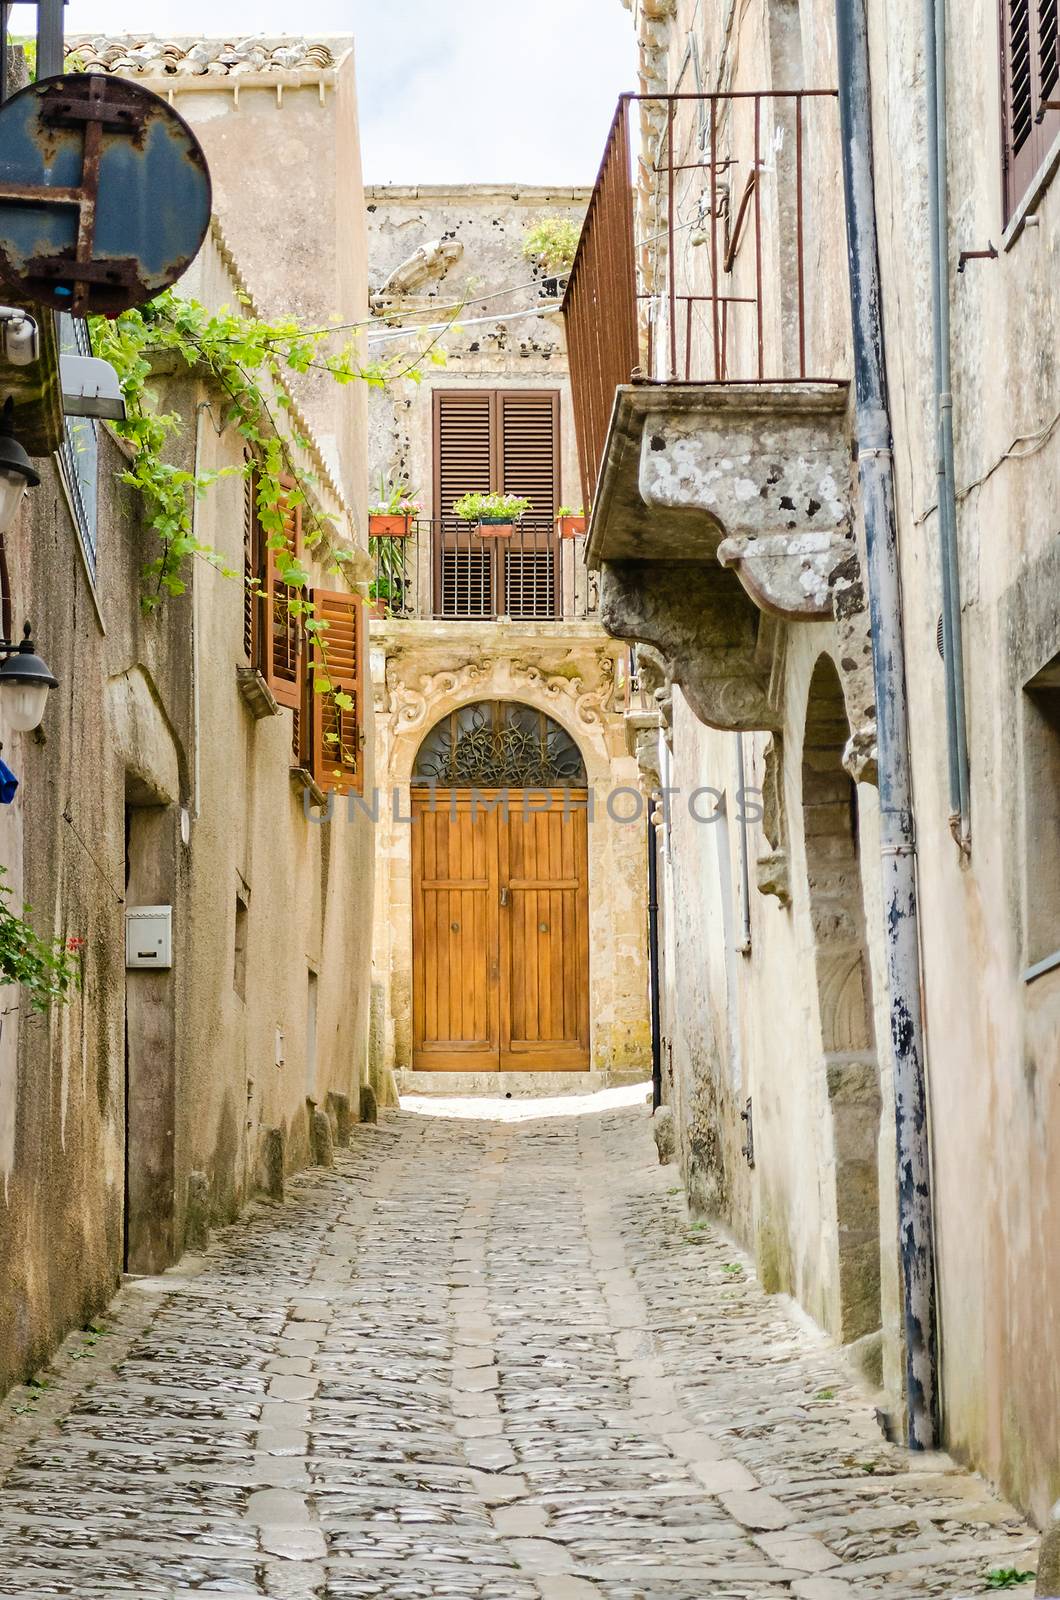 Stone paved ancient medieval street in the town of Erice, Sicily, Italy